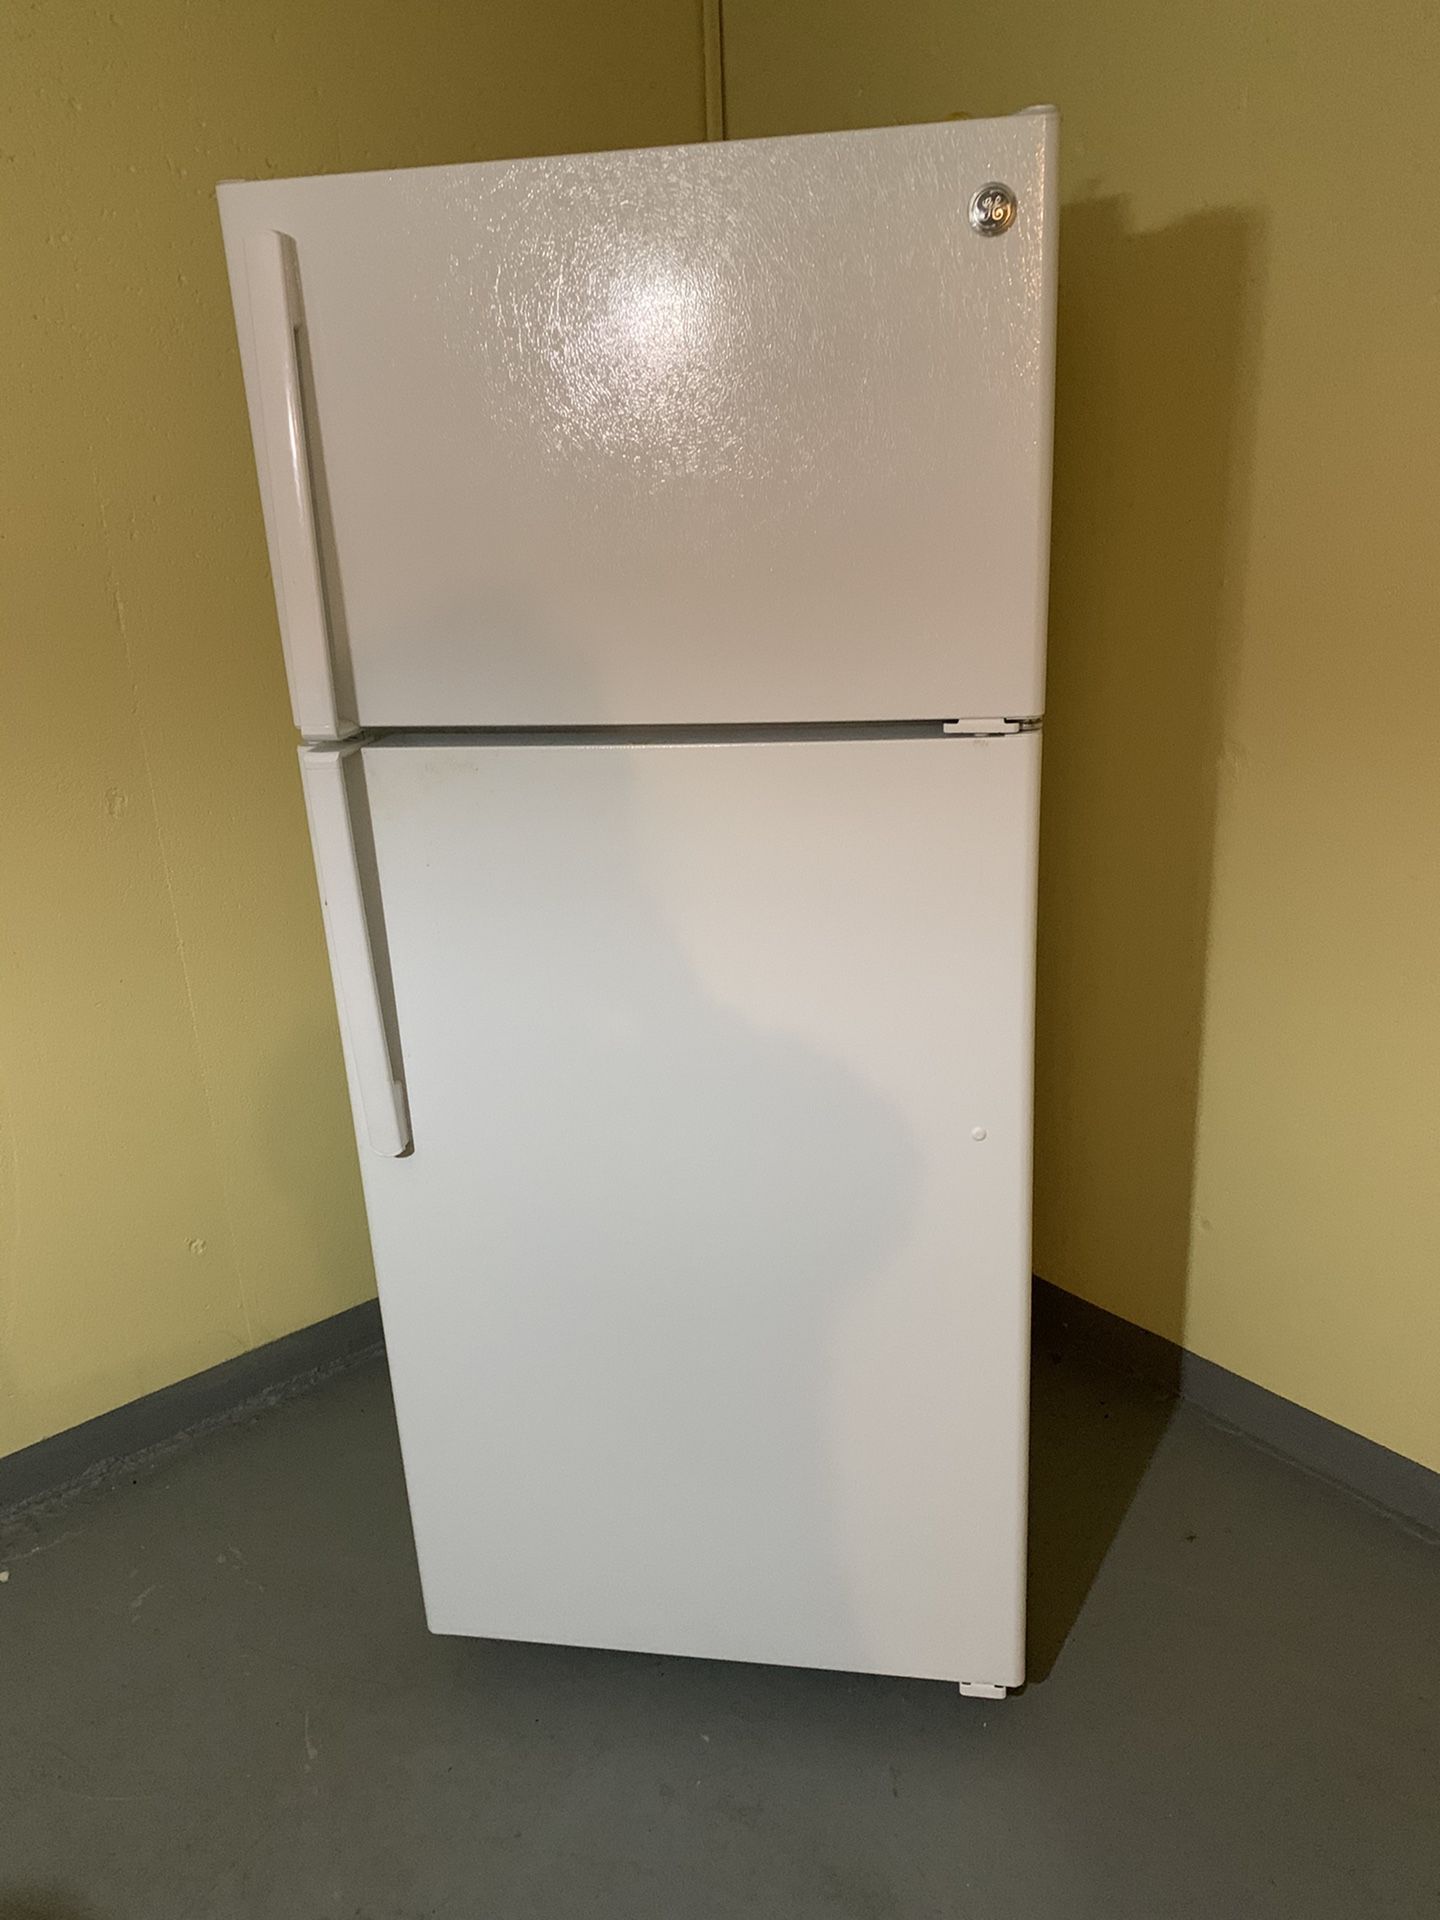 G.E, very good refrigerator less than two years old. Dimensions are: 64/28 inches.